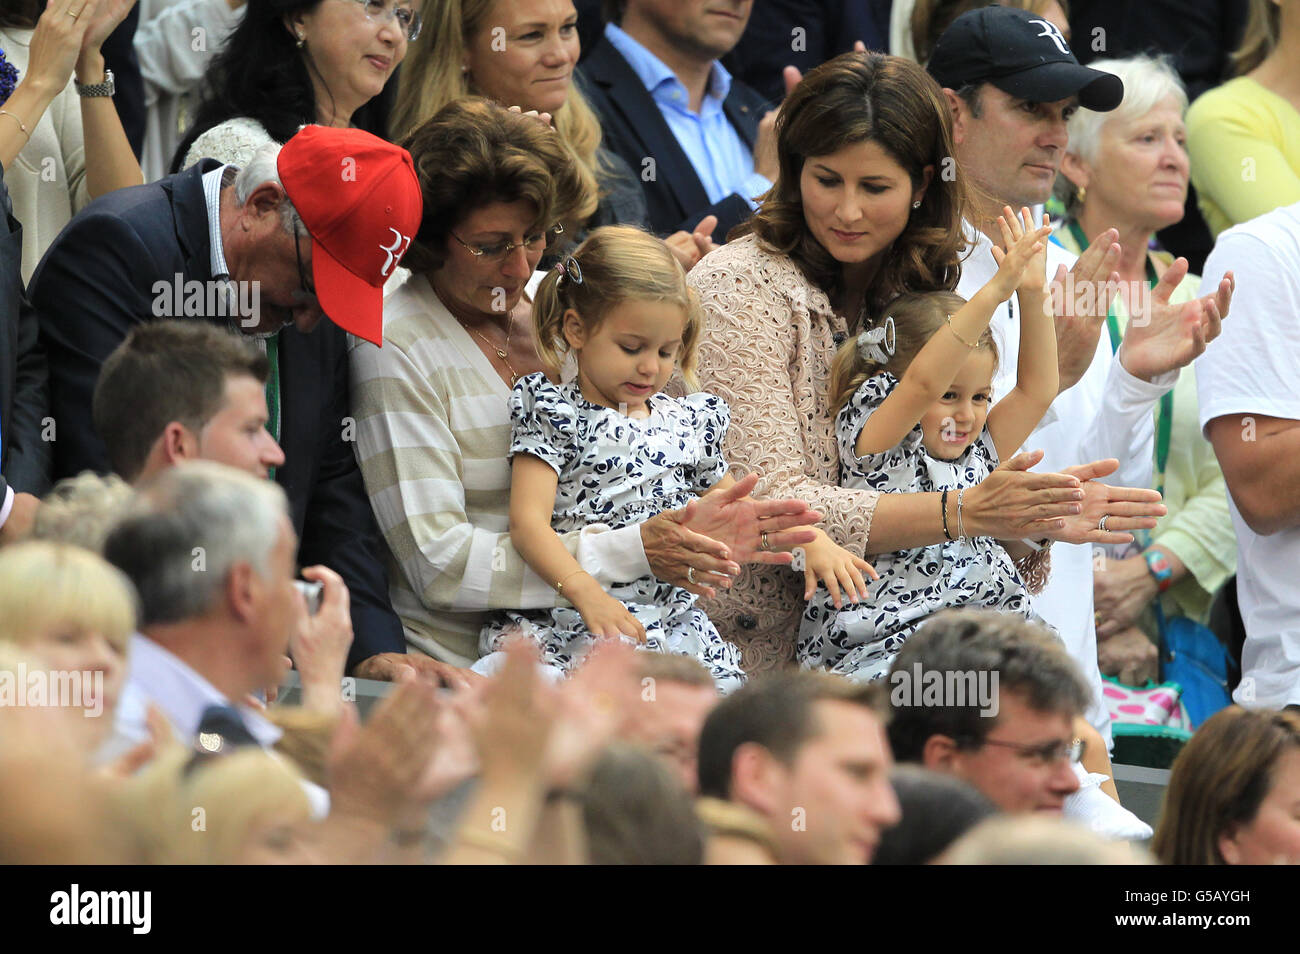 Switzerland's Roger Federer's wife Mirka Vavrinec with daughters Myla and Charlene during day thirteen of the 2012 Wimbledon Championships at the All England Lawn Tennis Club, Wimbledon. Stock Photo